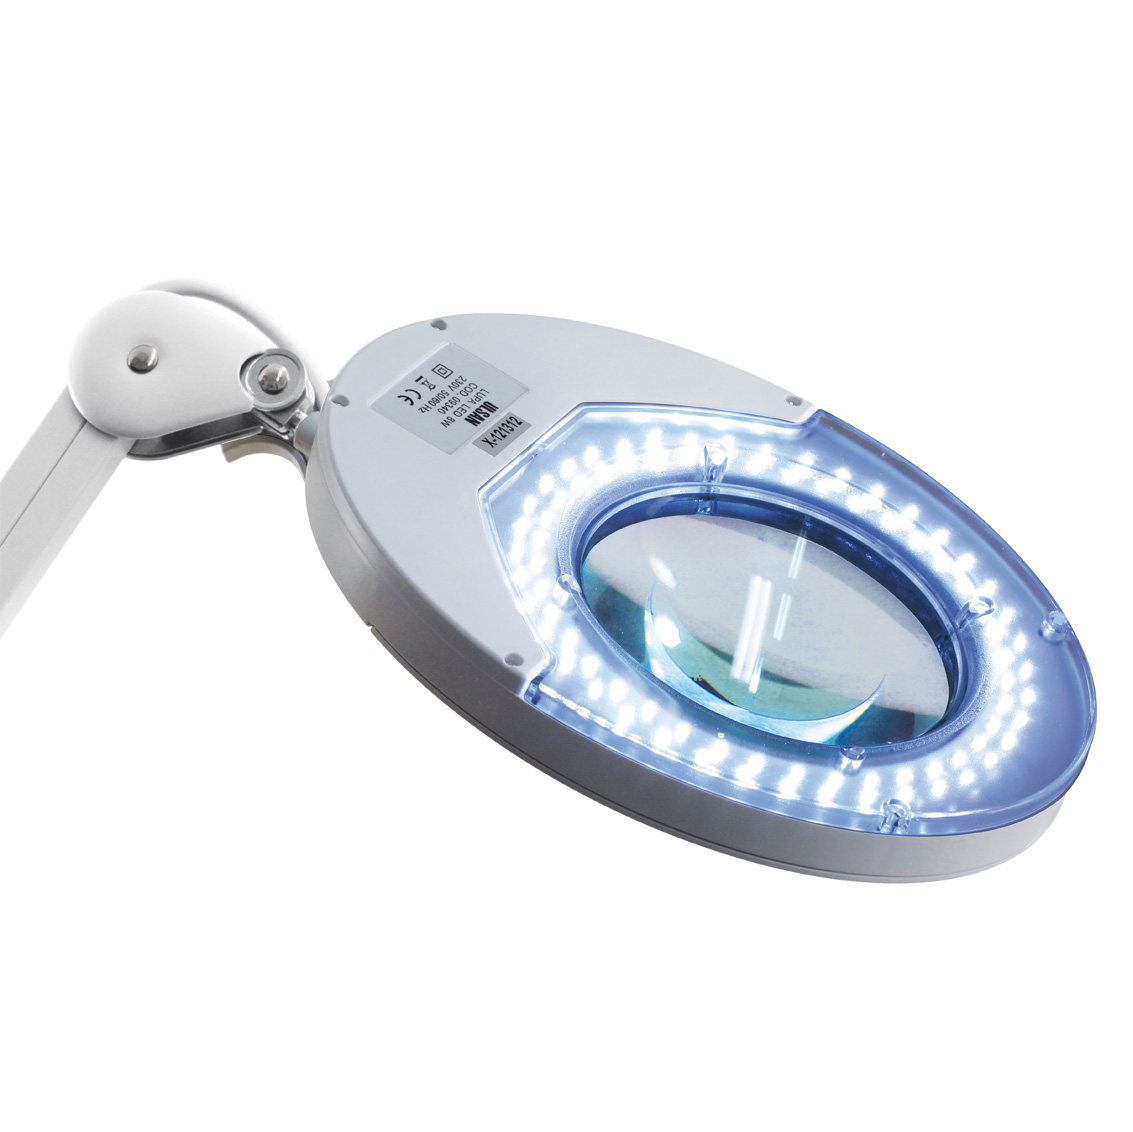 Led-Lampe mit weißer 5-Dioptrien-Lupe